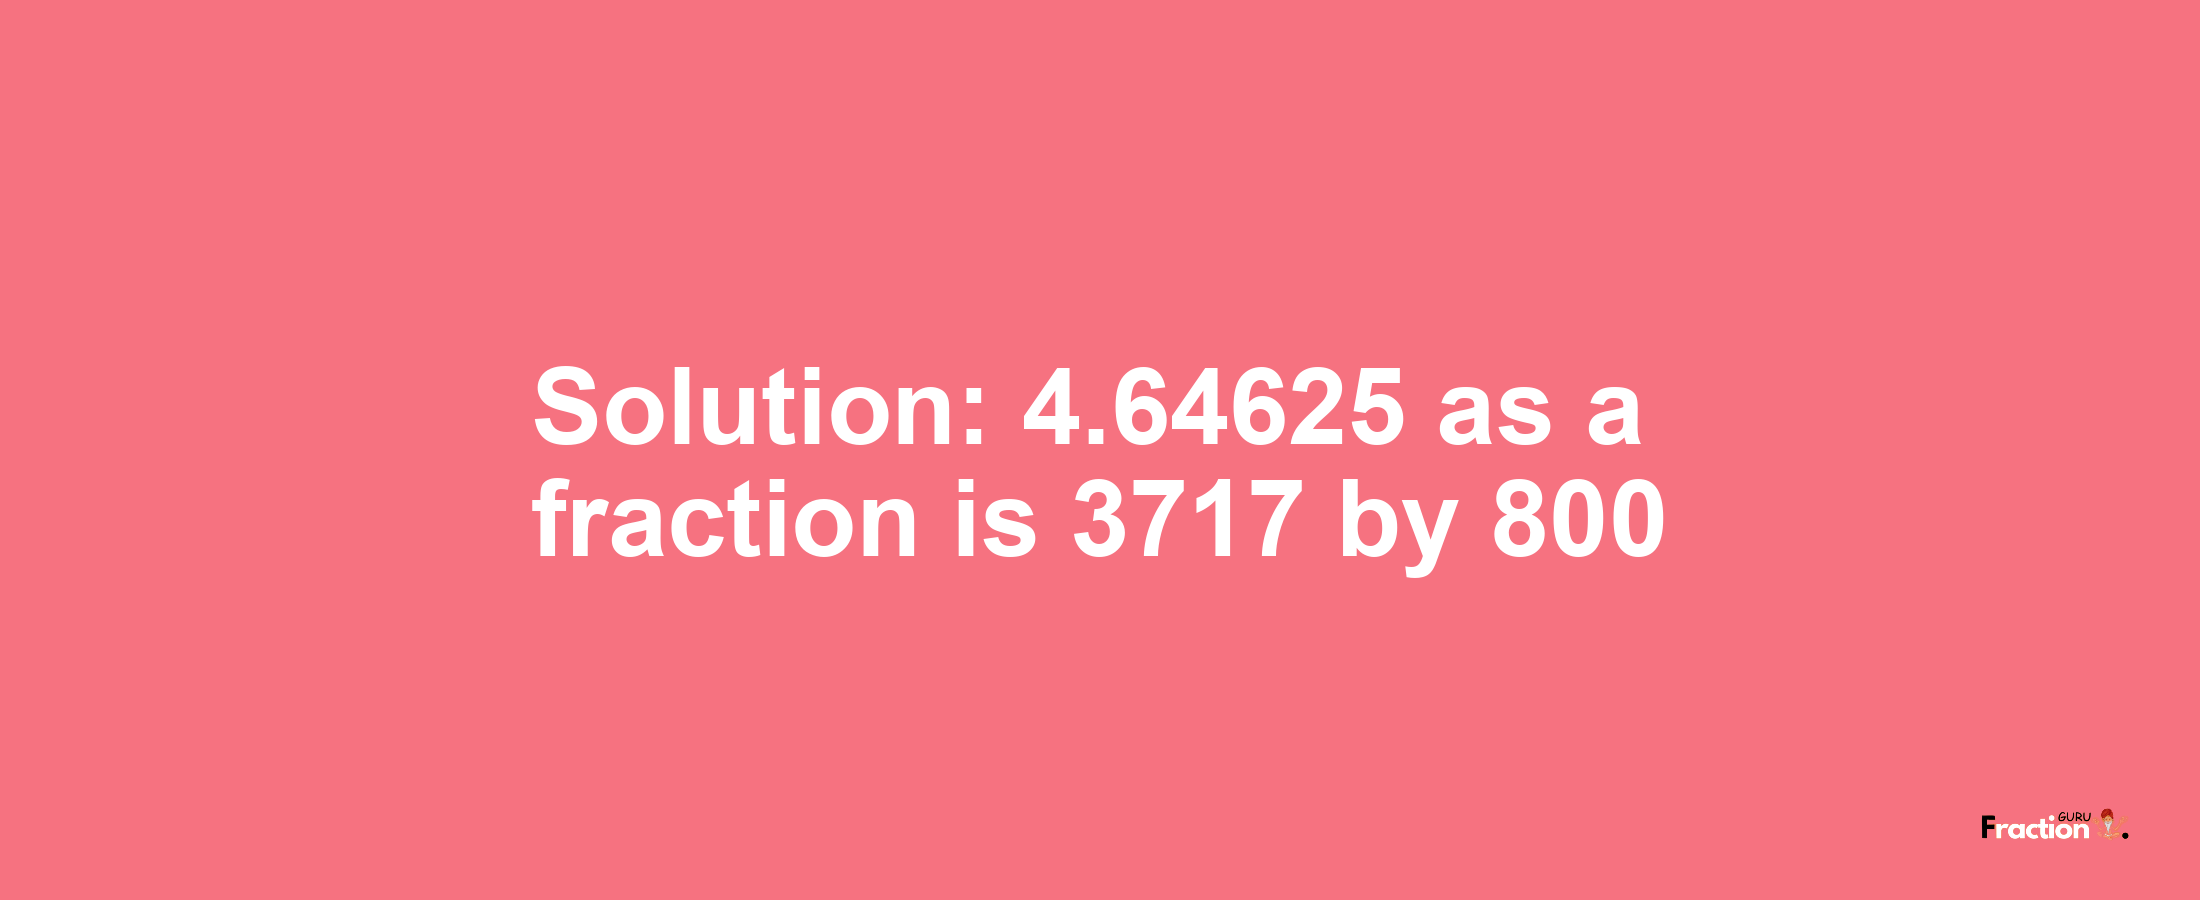 Solution:4.64625 as a fraction is 3717/800